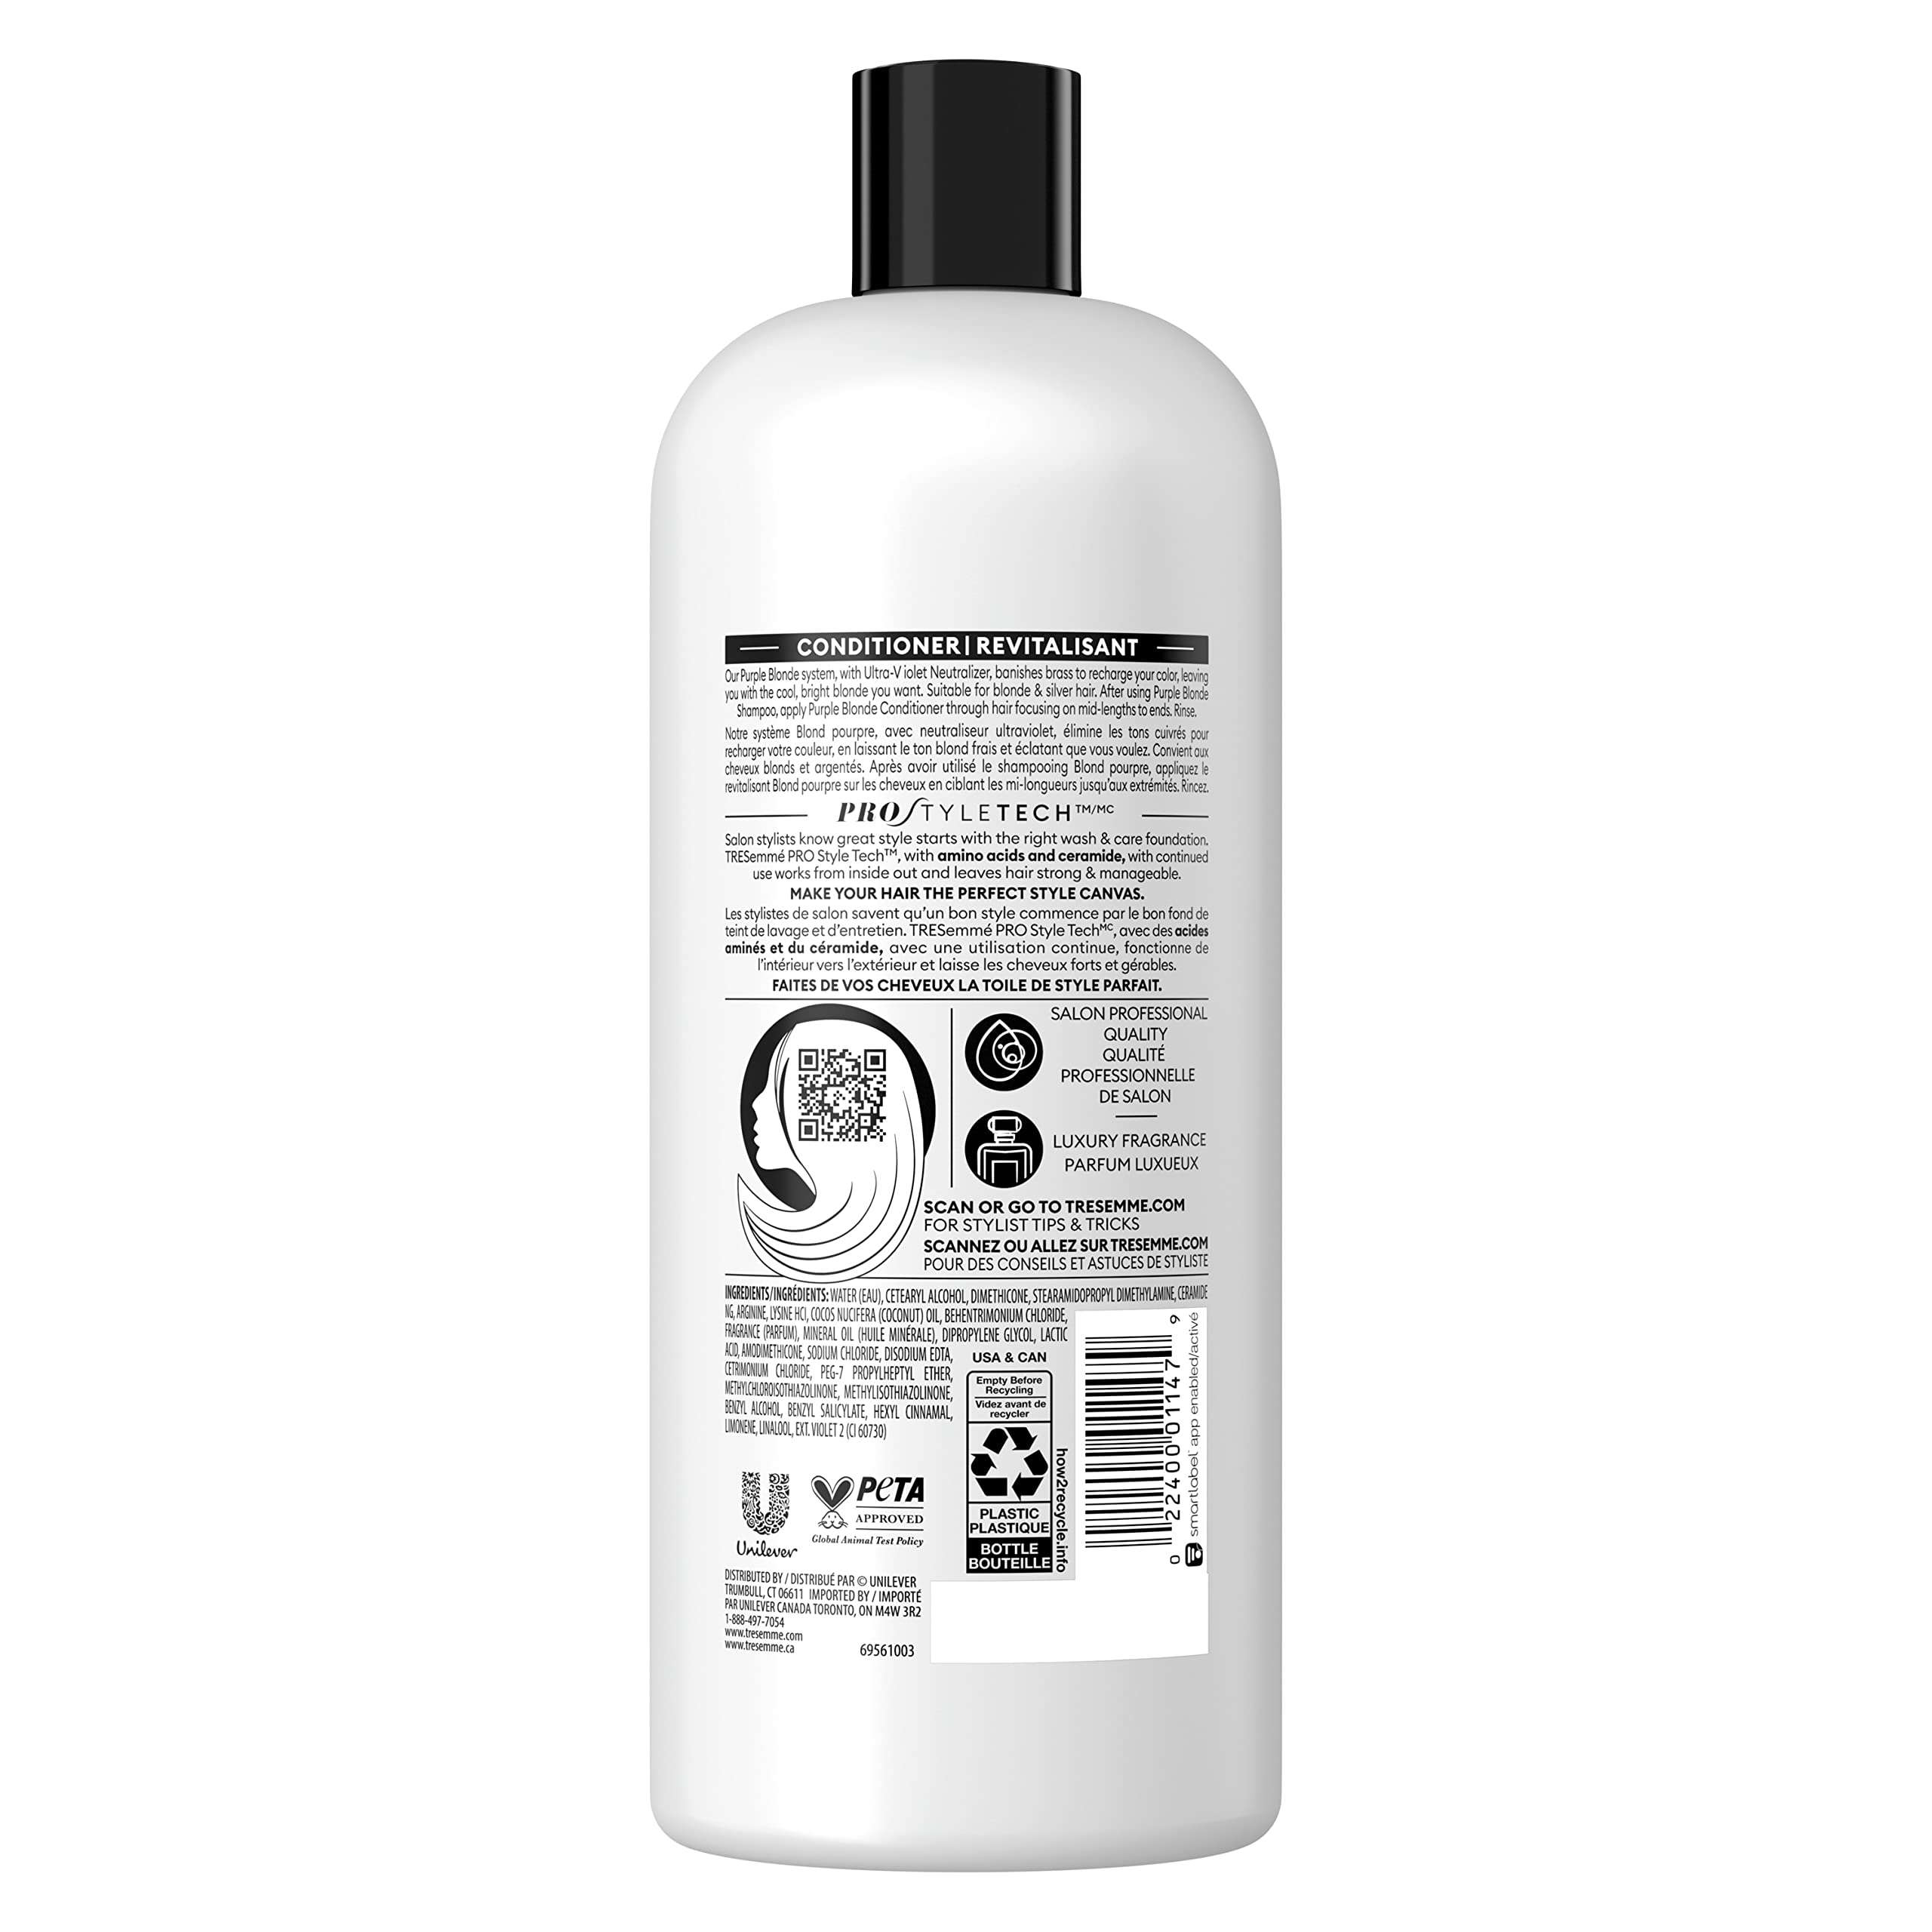 TRESemmé Conditioner 4 Count for Blonde & Silver Hair Formulated with Ultra-Violet Neutralizer Technology 28oz